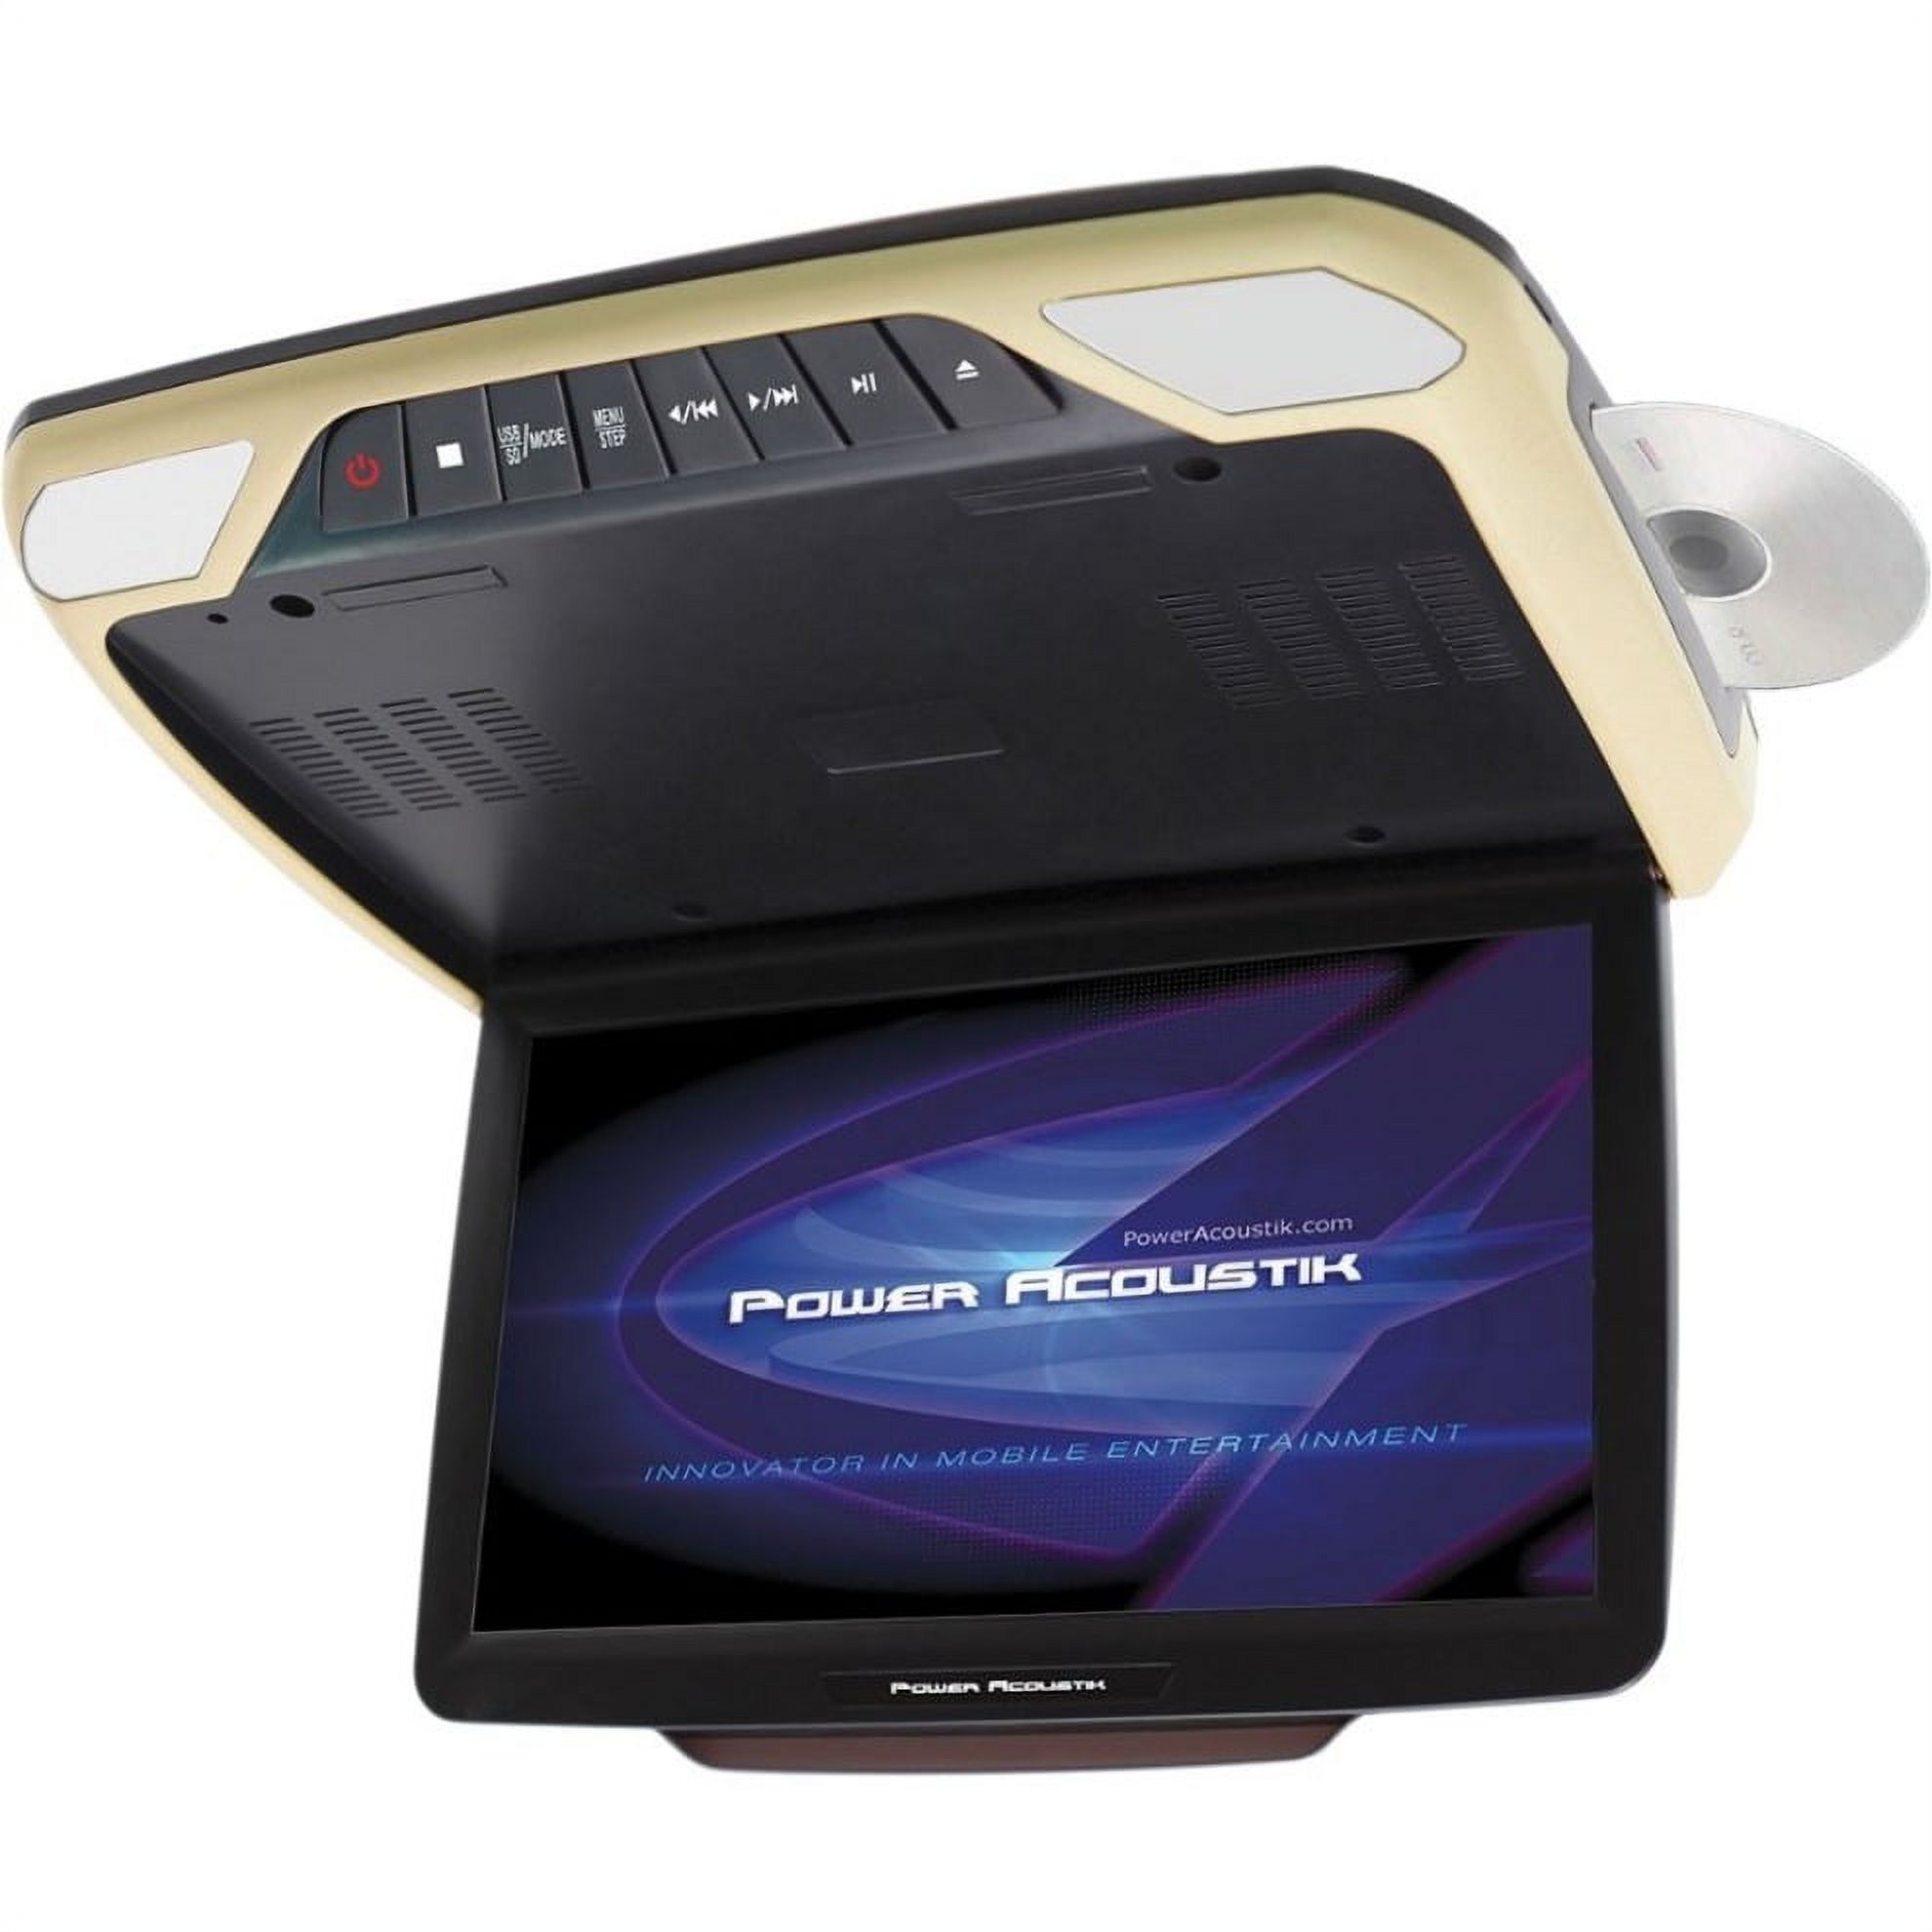 Power Acoustik PMD-143H Car DVD Player, 14.3" LCD, 16:9 - image 1 of 3